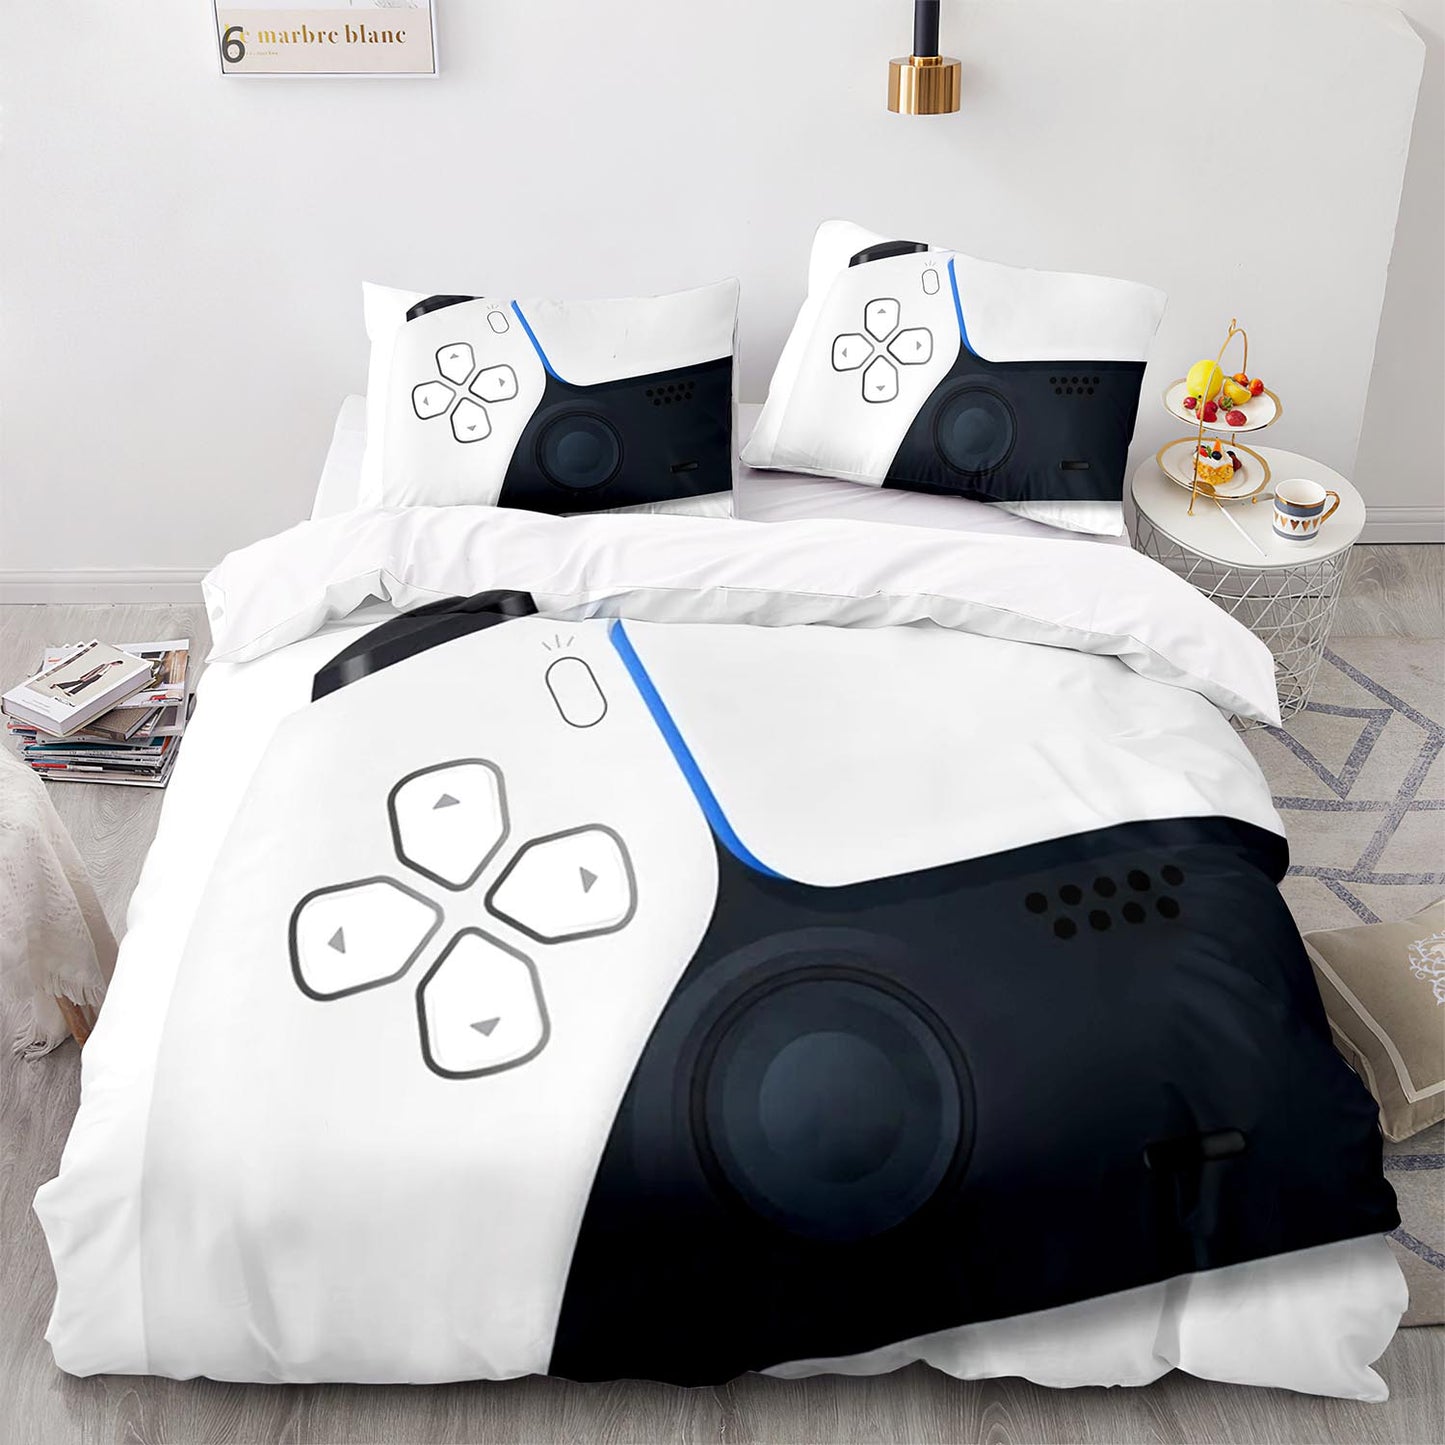 Customize Photo Logo Duvet Cover Boys Girls Adults Gift Custom Made DIY Bedding Set Designer Bed Set Queen Size Quilt Cover  PS1032